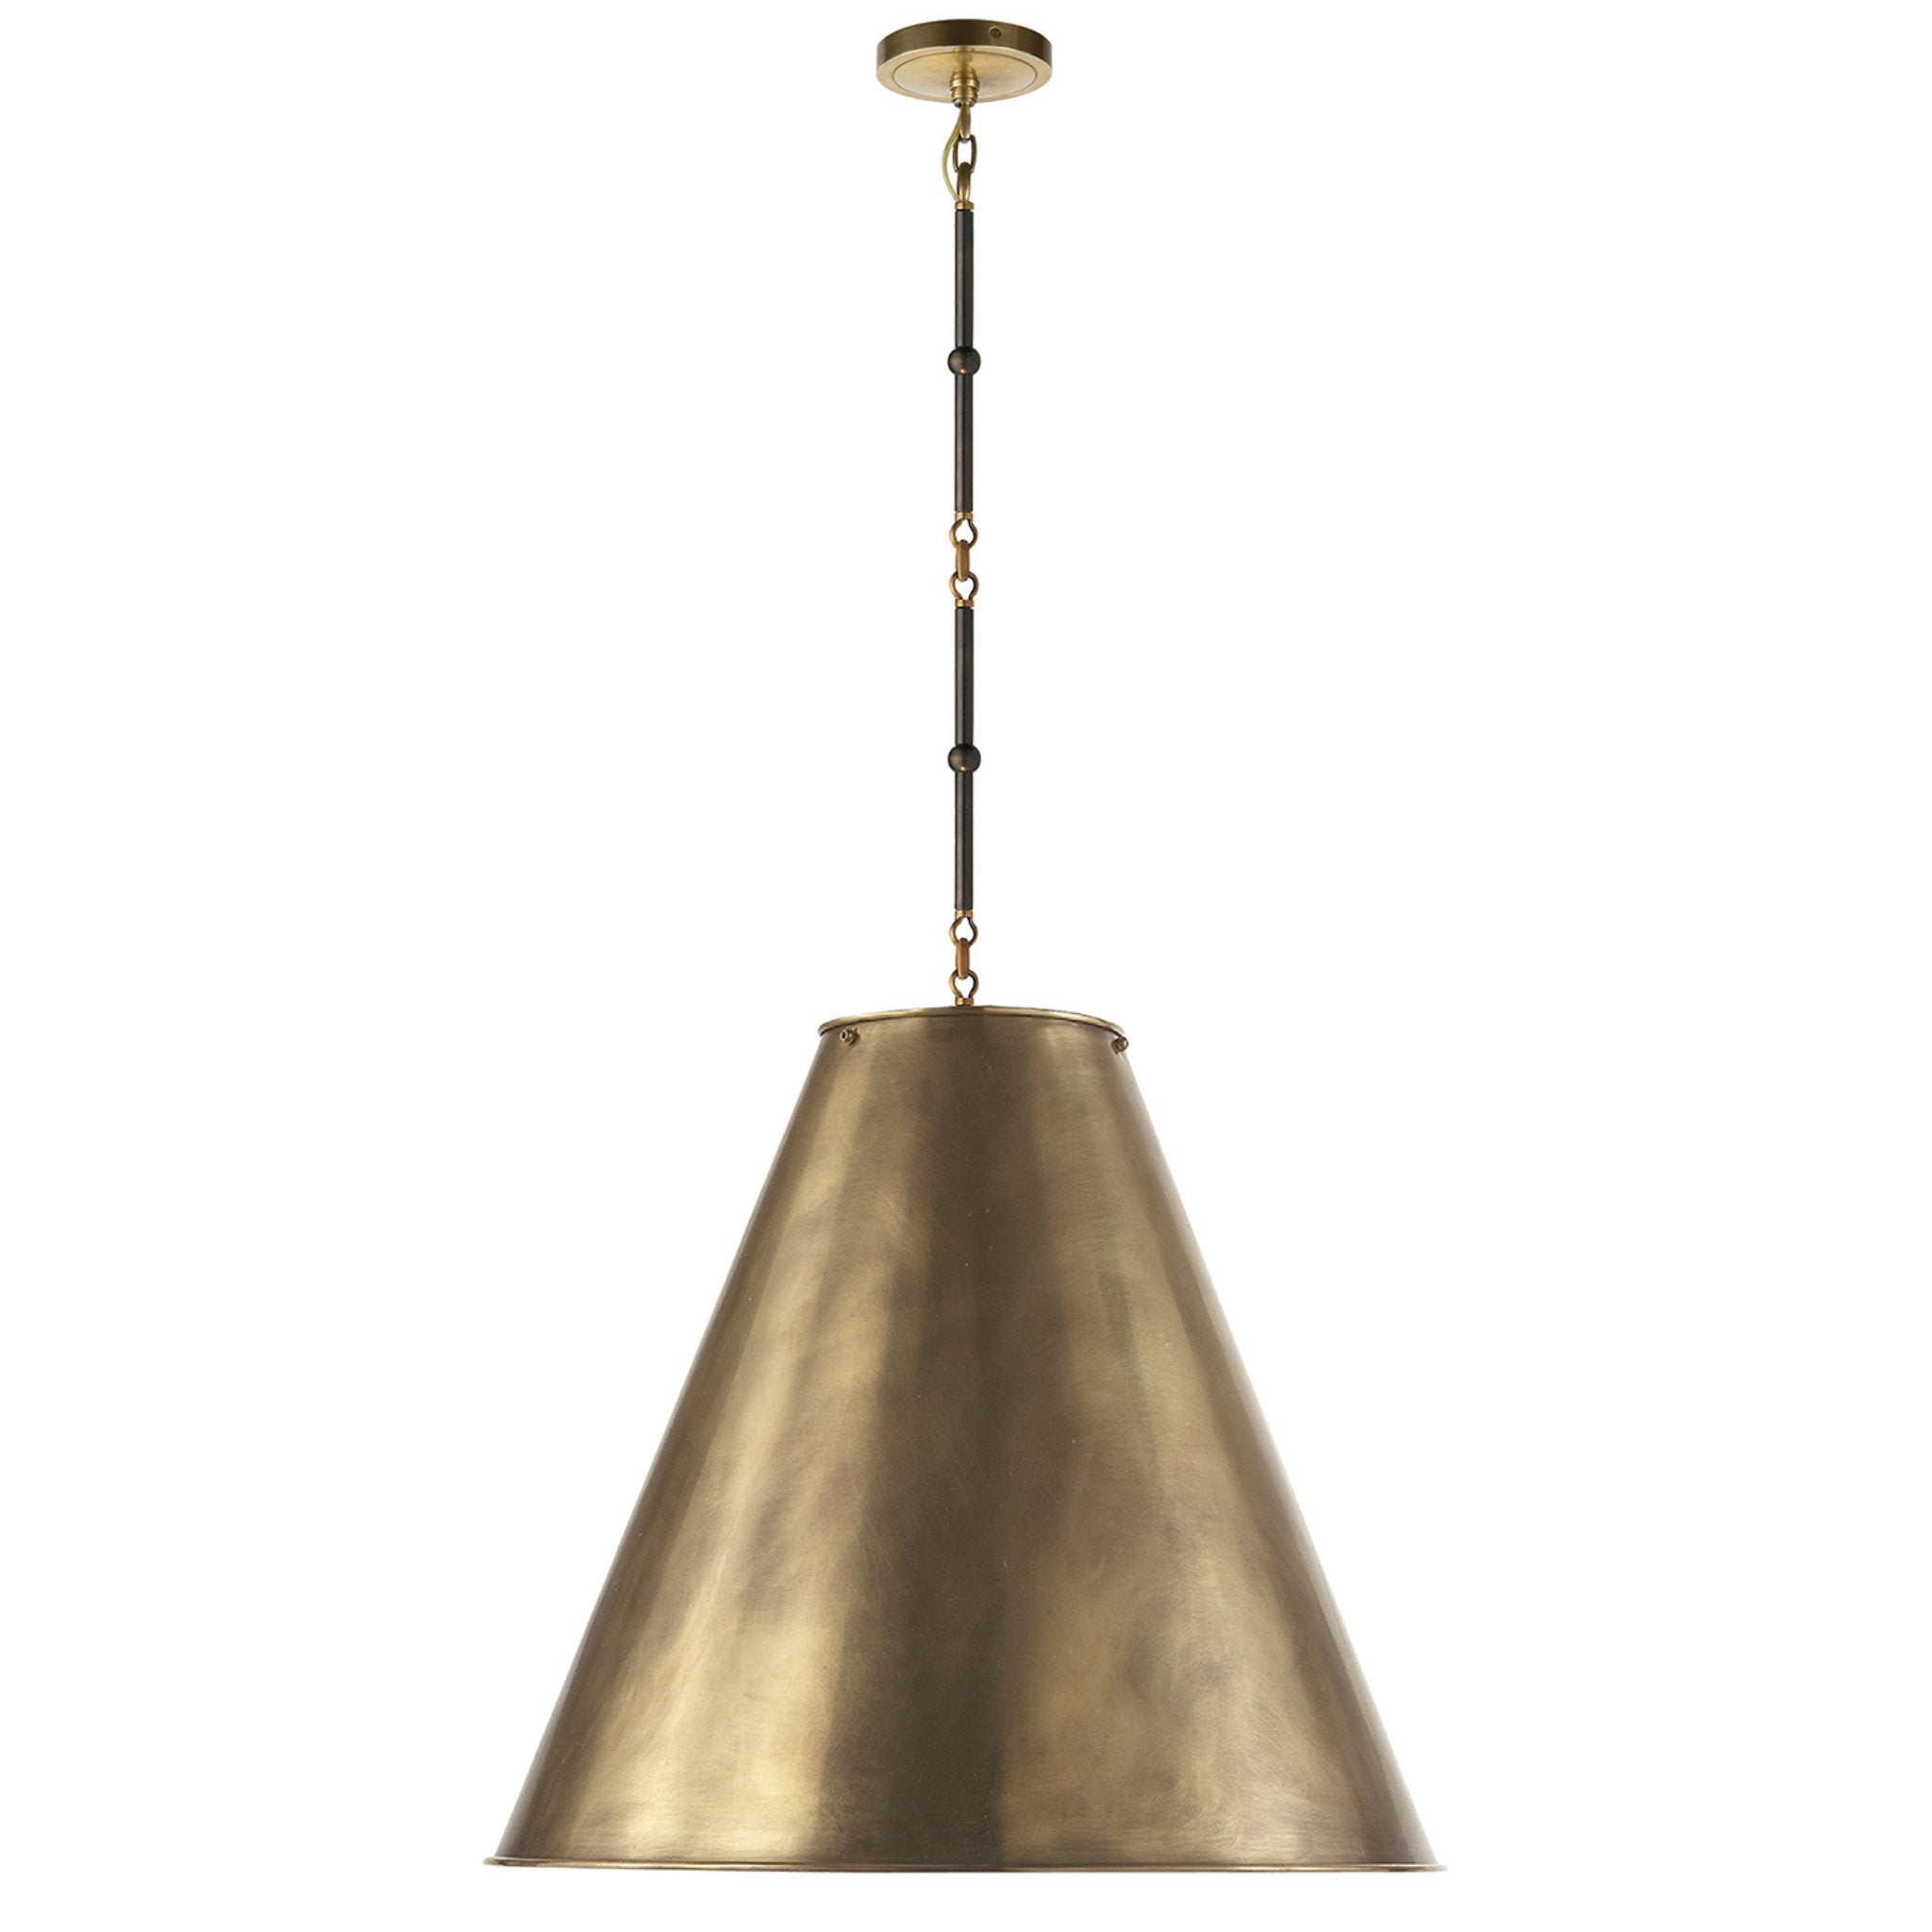 Thomas O'Brien Goodman Large Hanging Lamp in Bronze and Hand-Rubbed Antique Brass with Hand-Rubbed Antique Brass Shade